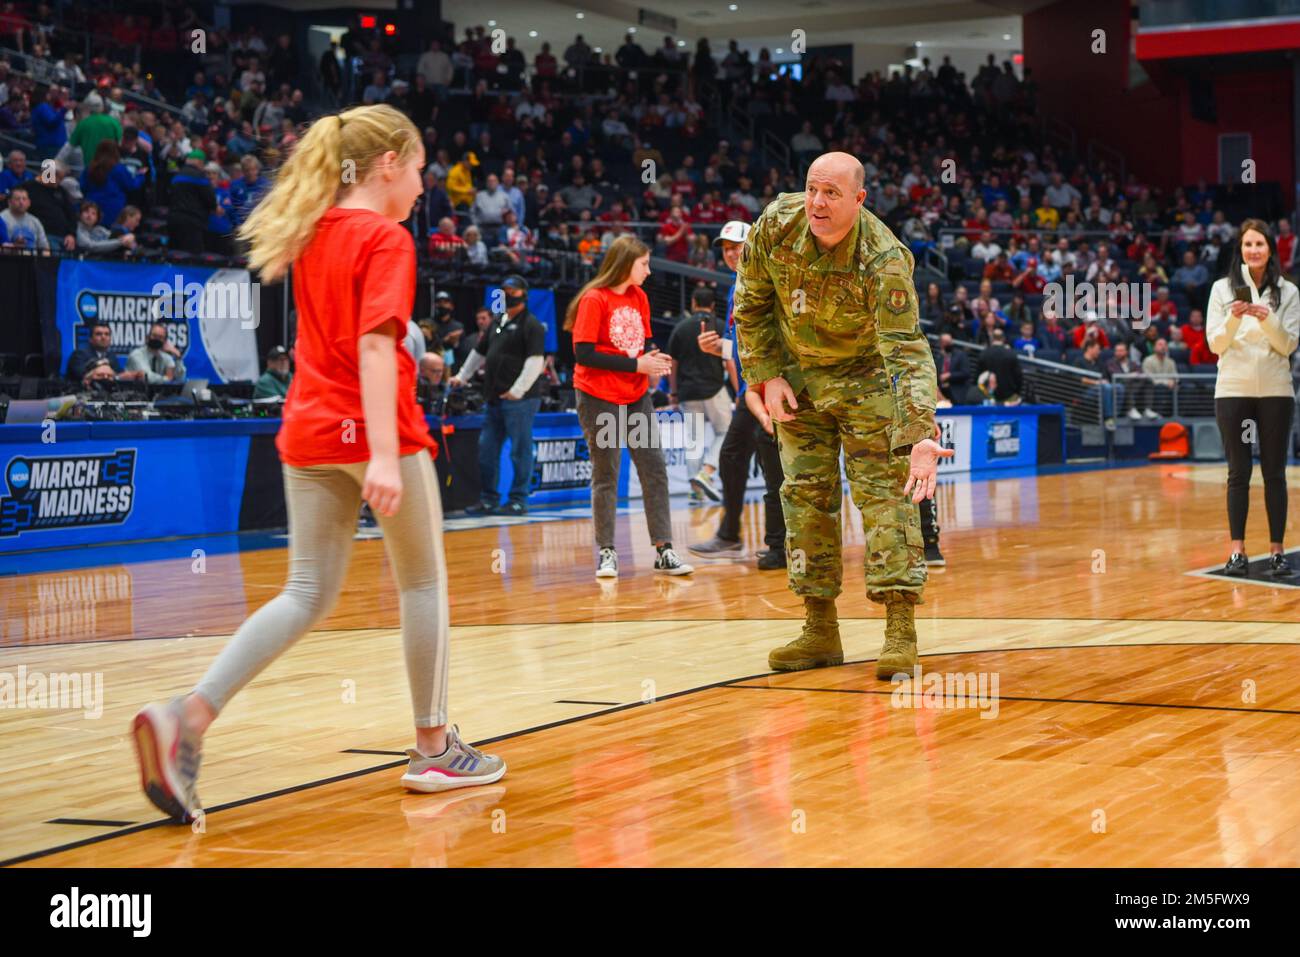 Col. Patrick Miller, 88th Air Base Wing commander, high-fives one of the Big Hoopla STEM Challenge finalists March 15, 2022, at University of Dayton Arena. Since 2012, the Big Hoopla has showcased Dayton’s collaborative spirit, community support and military appreciation as host of the NCAA men's basketball tournament First Four. Stock Photo